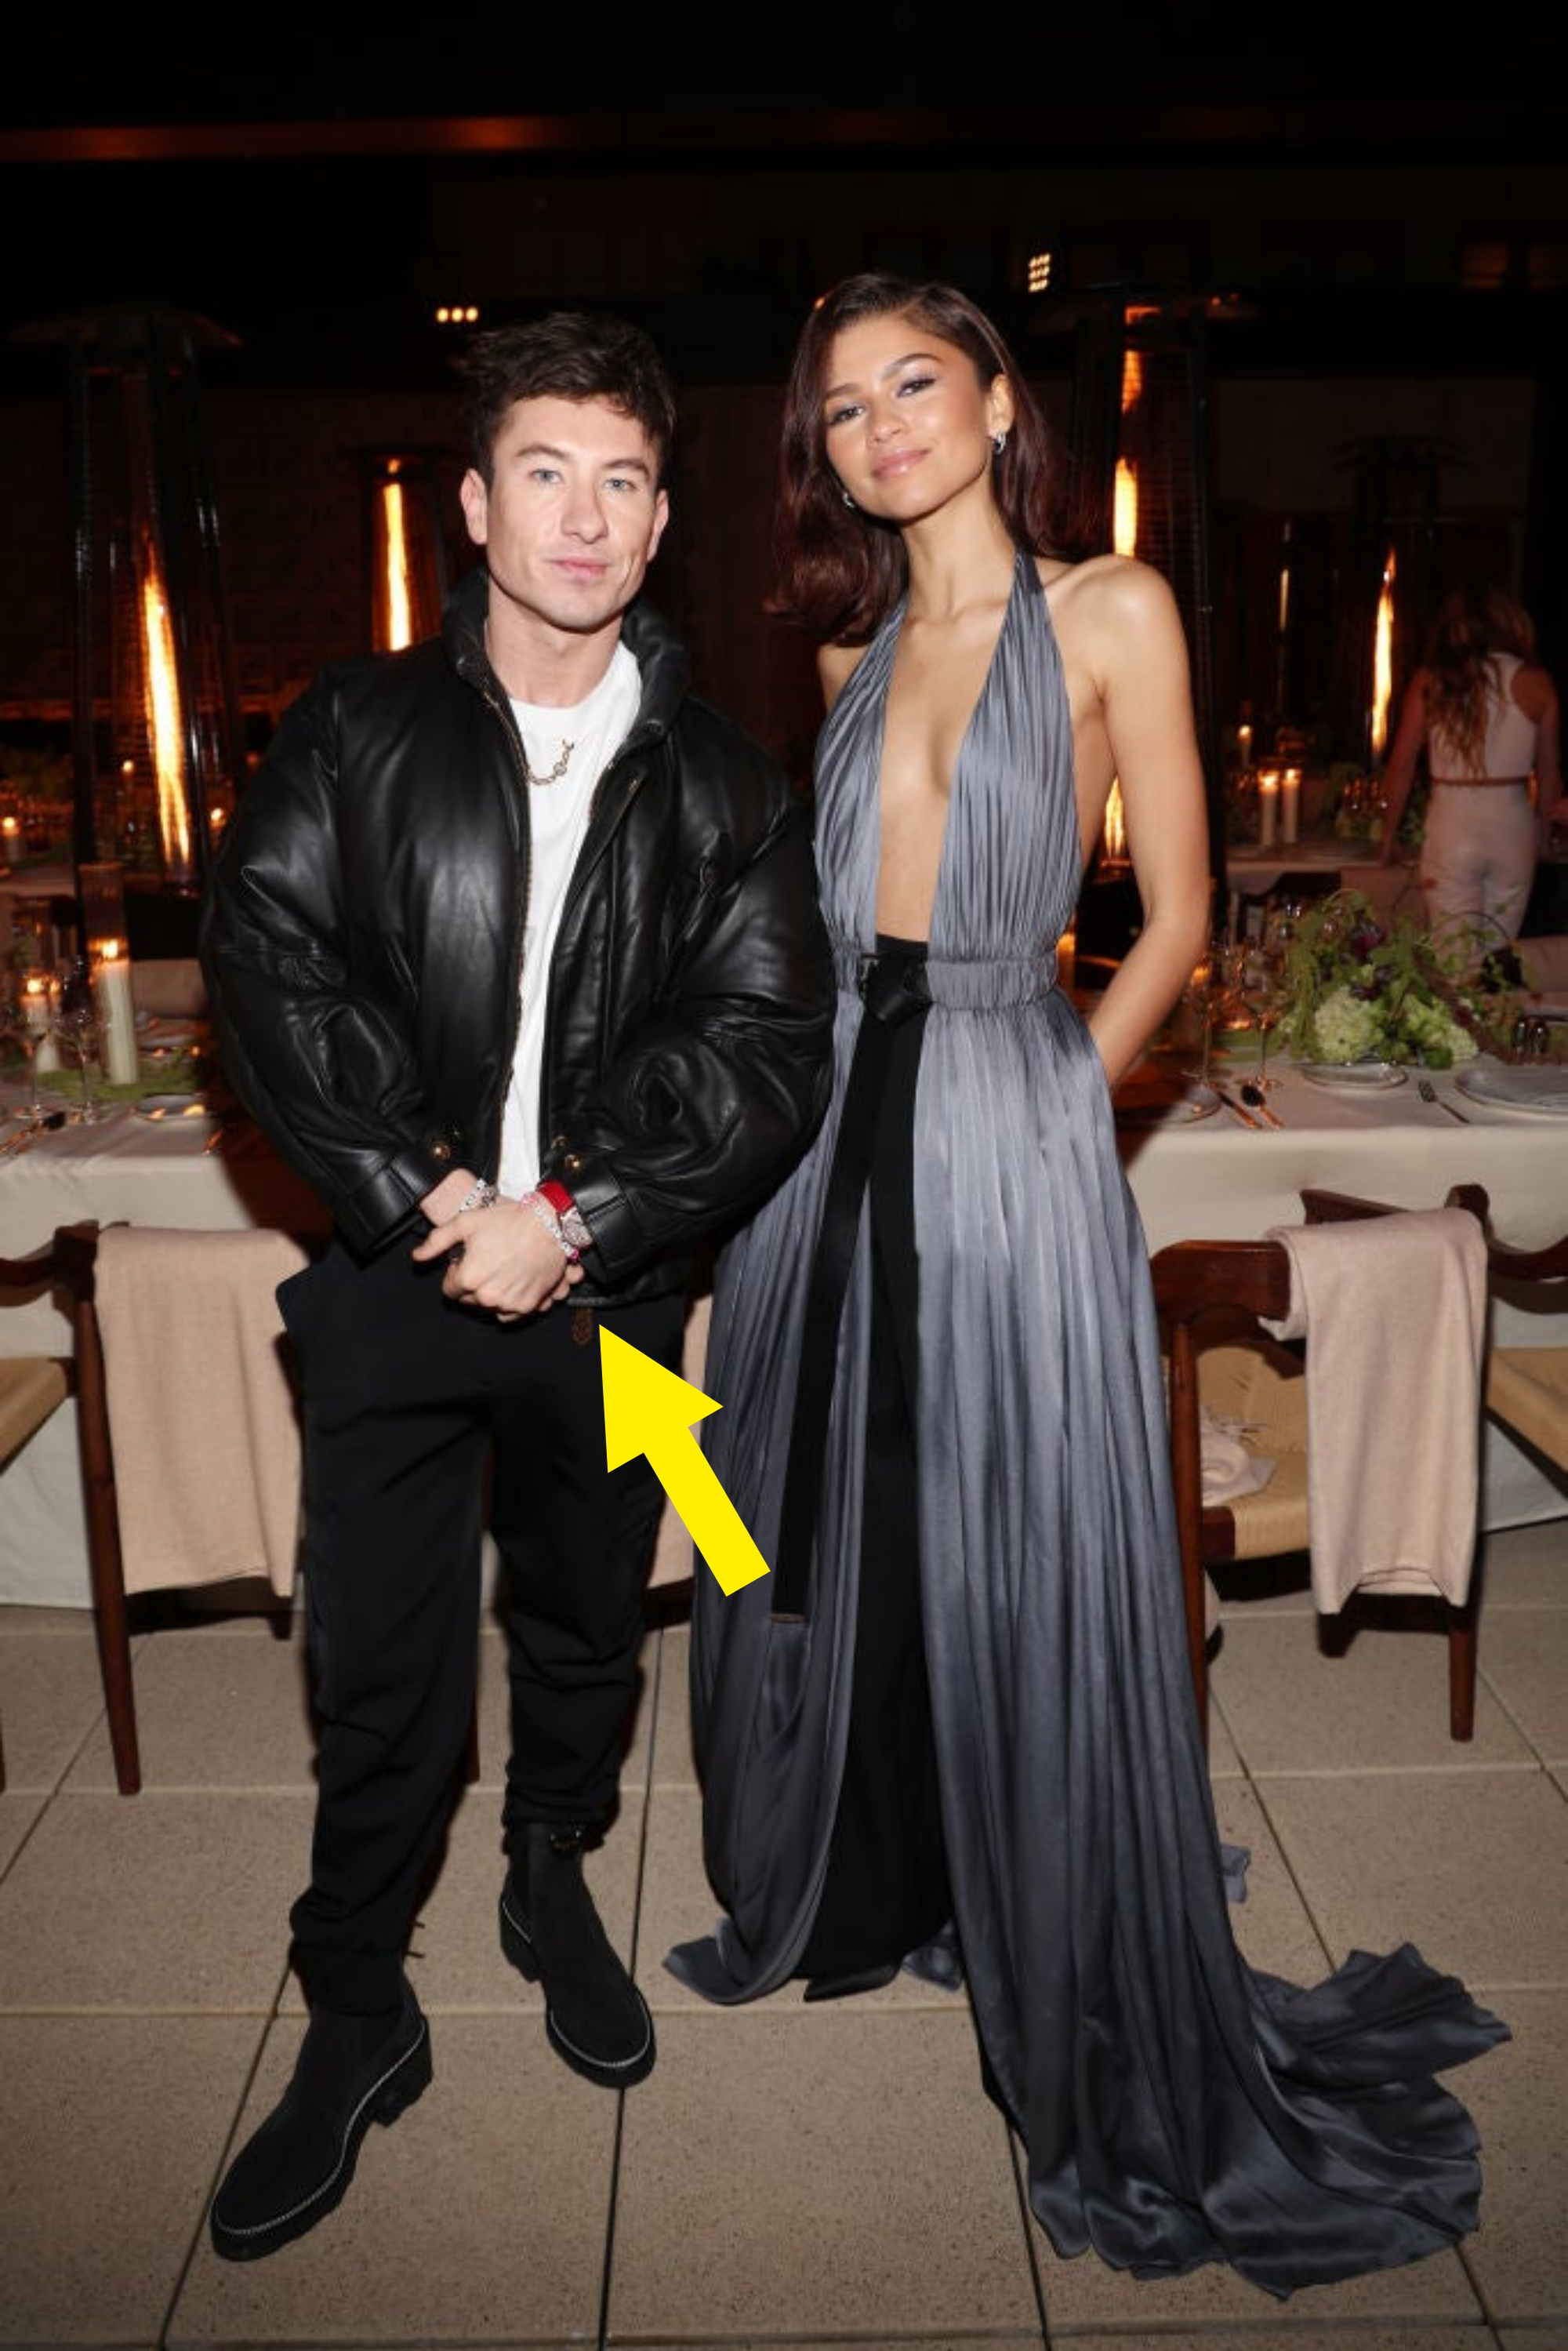 zendaya is in a plunging neckline gown as she poses next to him